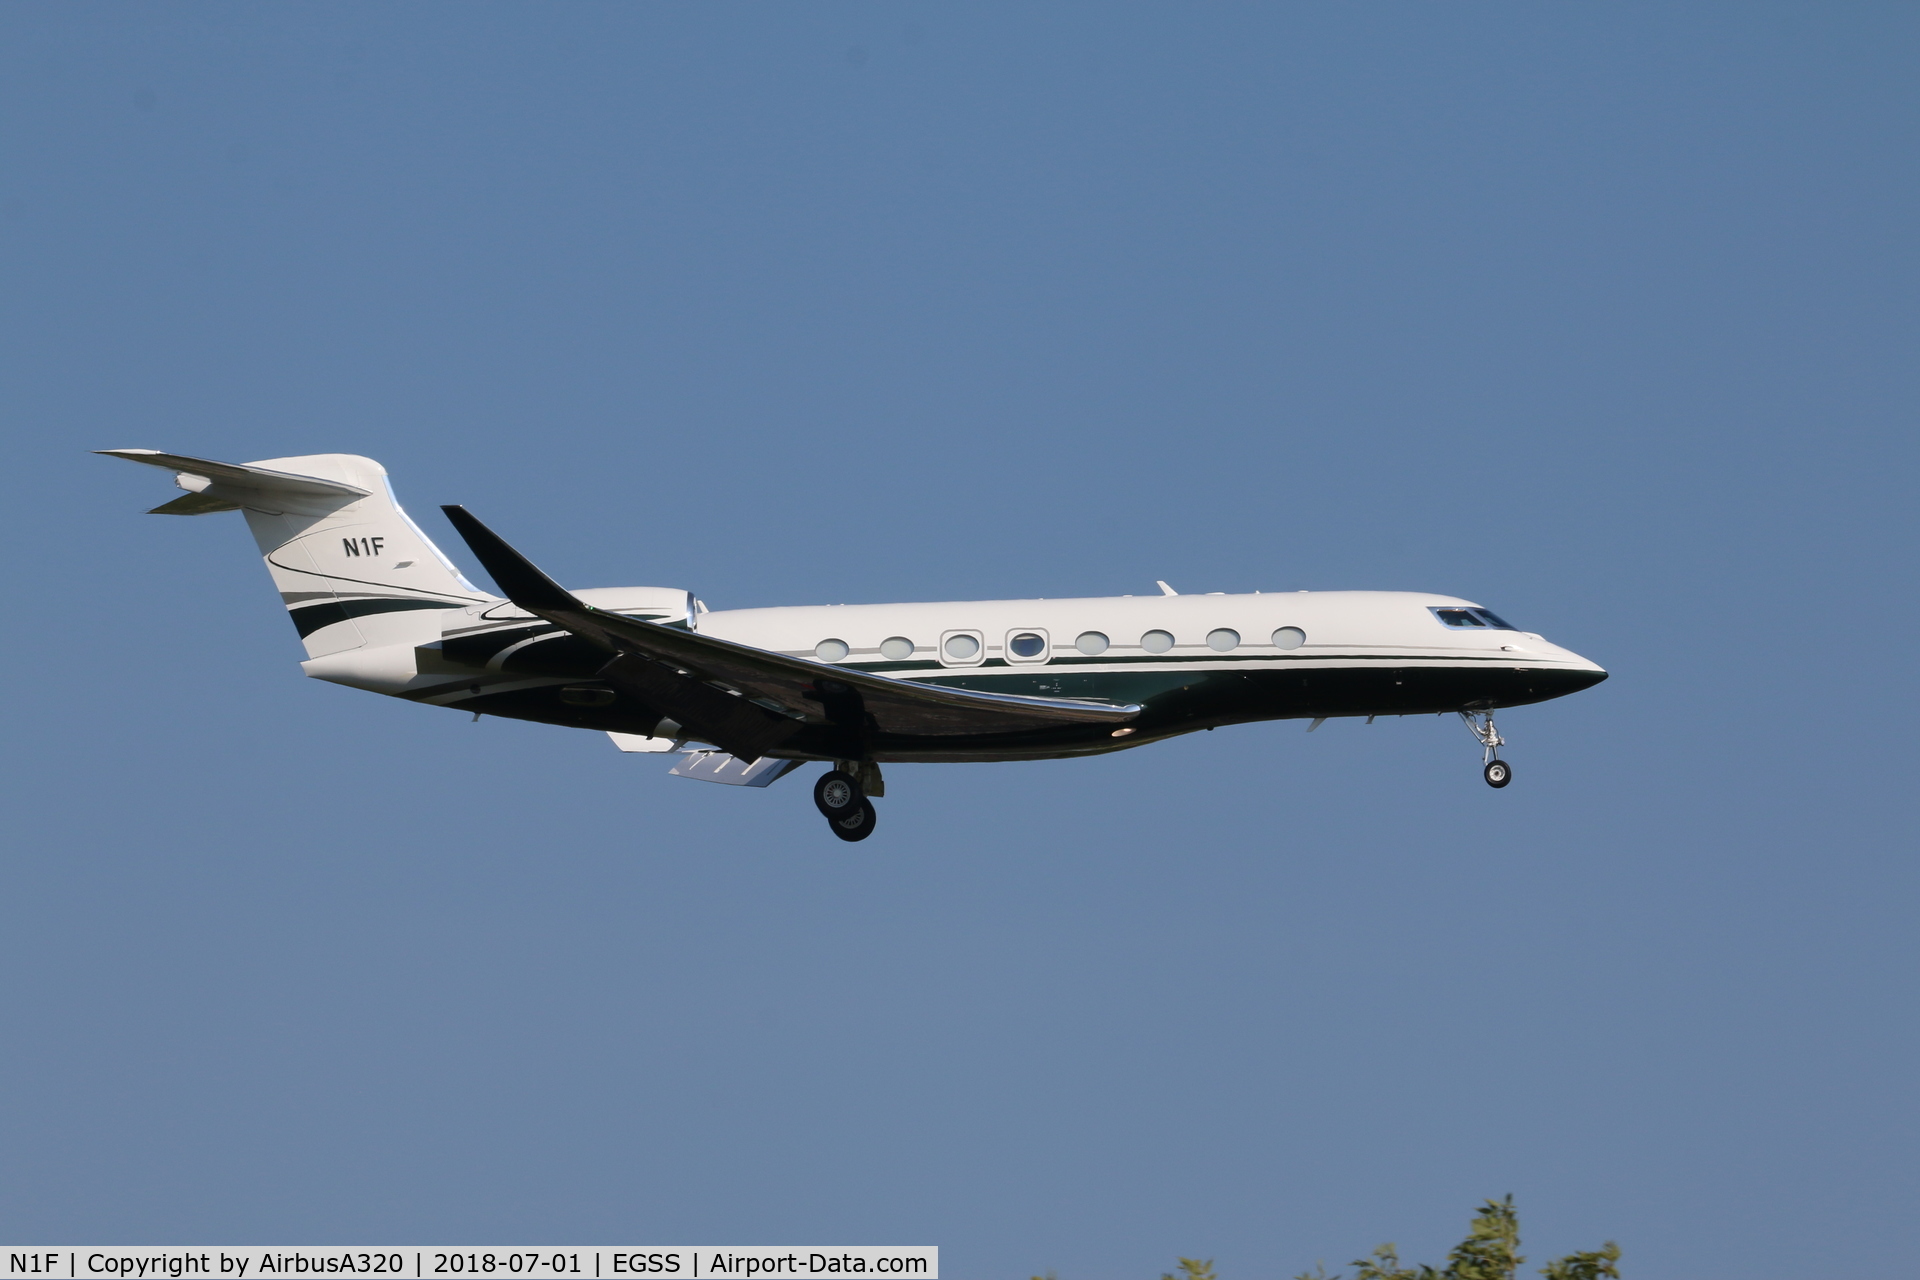 N1F, 2014 Gulfstream Aerospace G650 (G-VI) C/N 6076, Arriving at Stansted